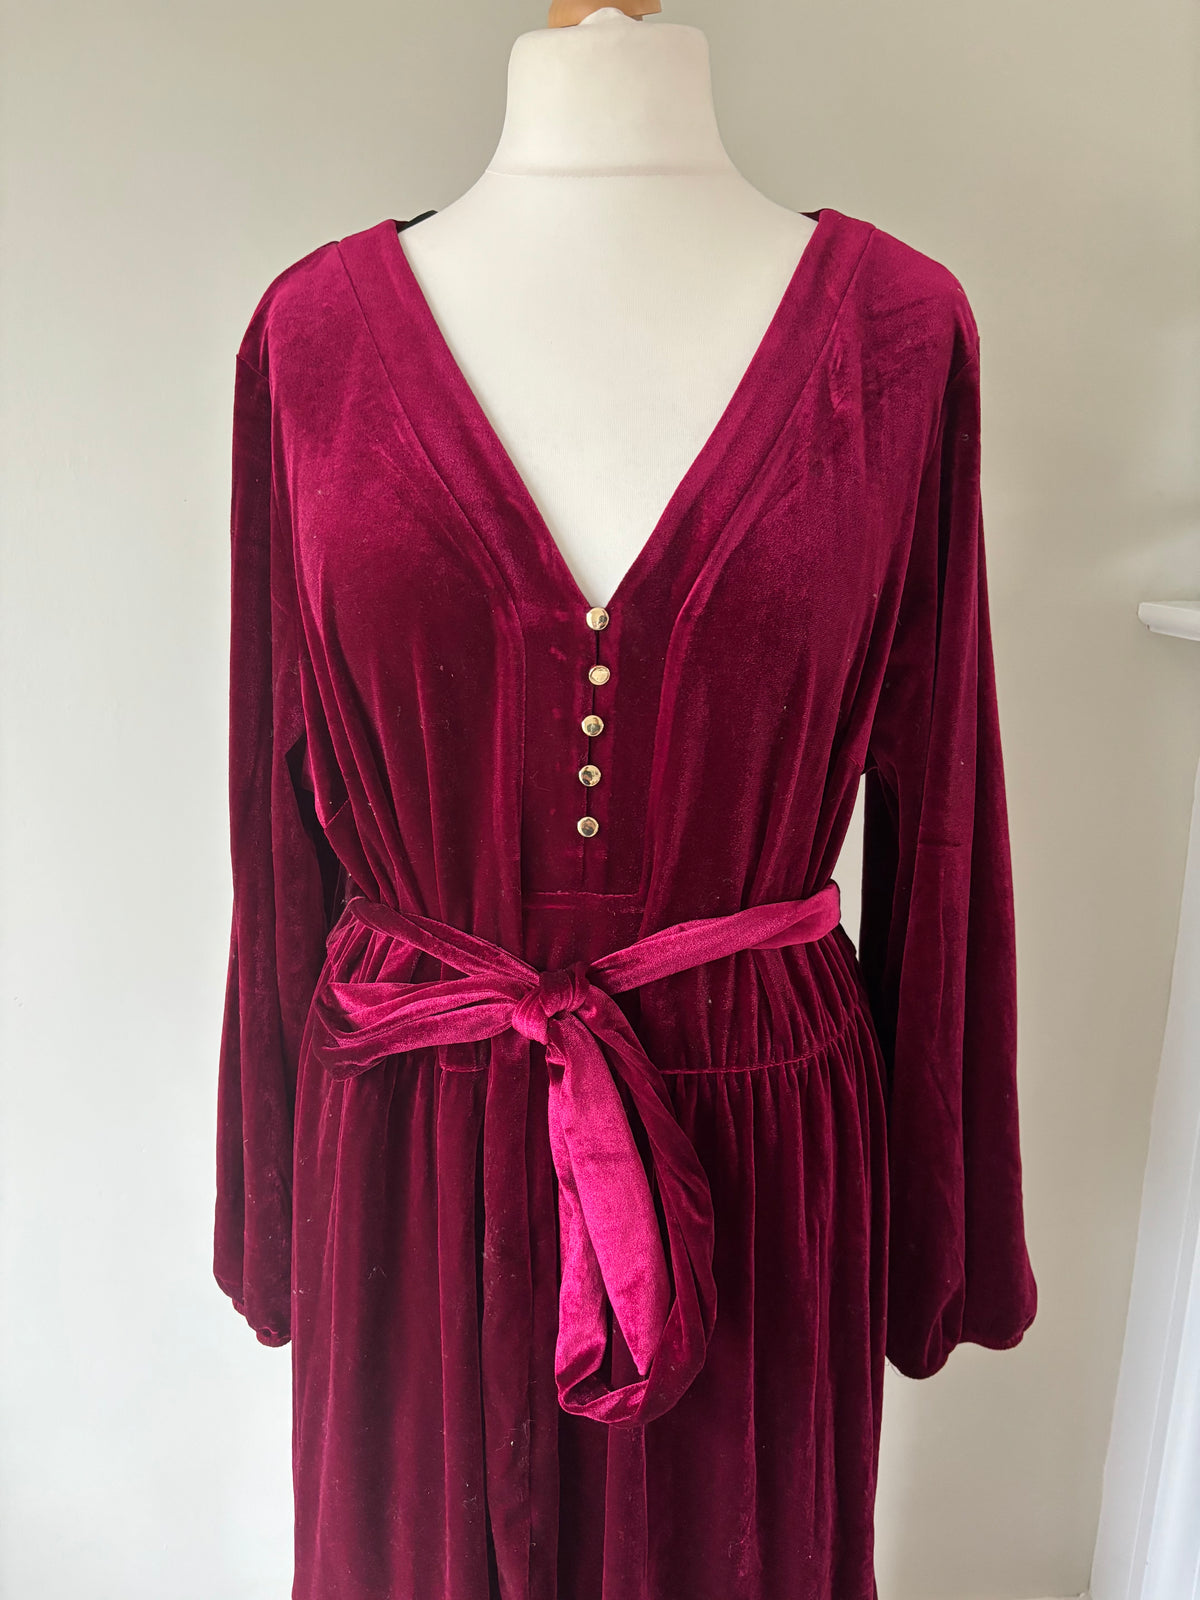 Berry Velour Tiered Midi Dress by Together Size 20